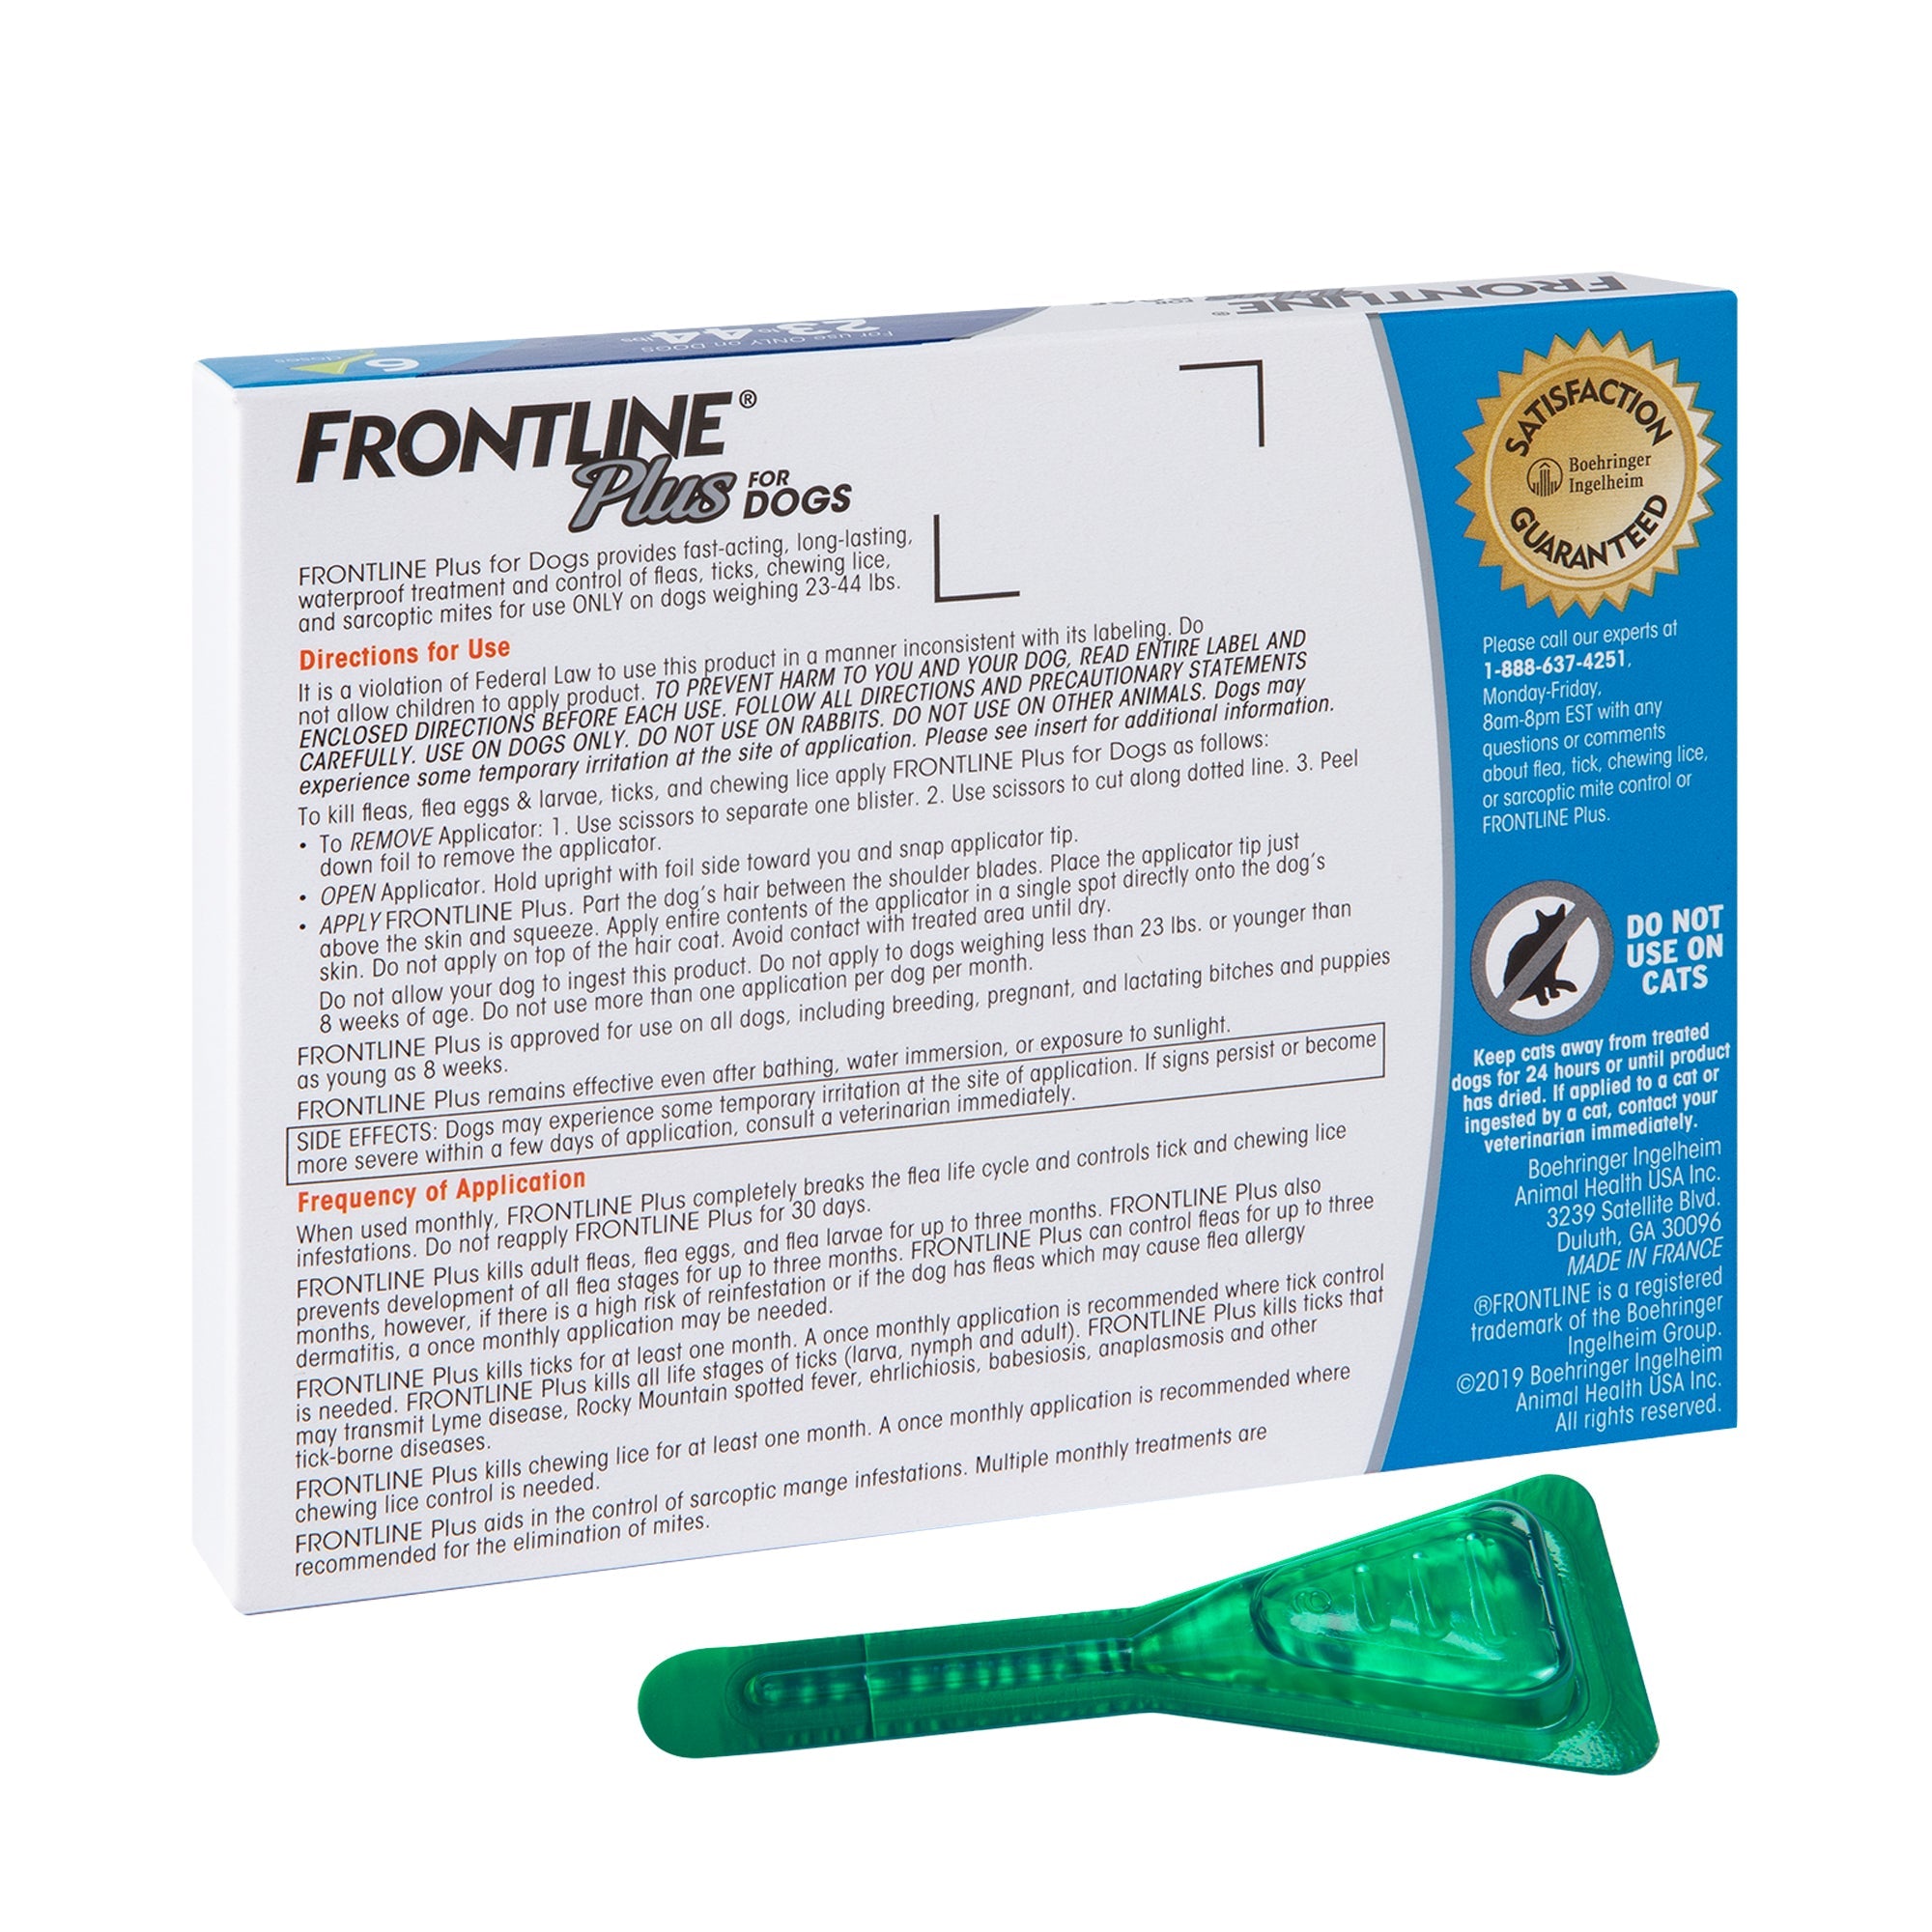 FRONTLINE Plus Flea and Tick Treatment for Large Dogs 23-44 Lbs, 6 Doses